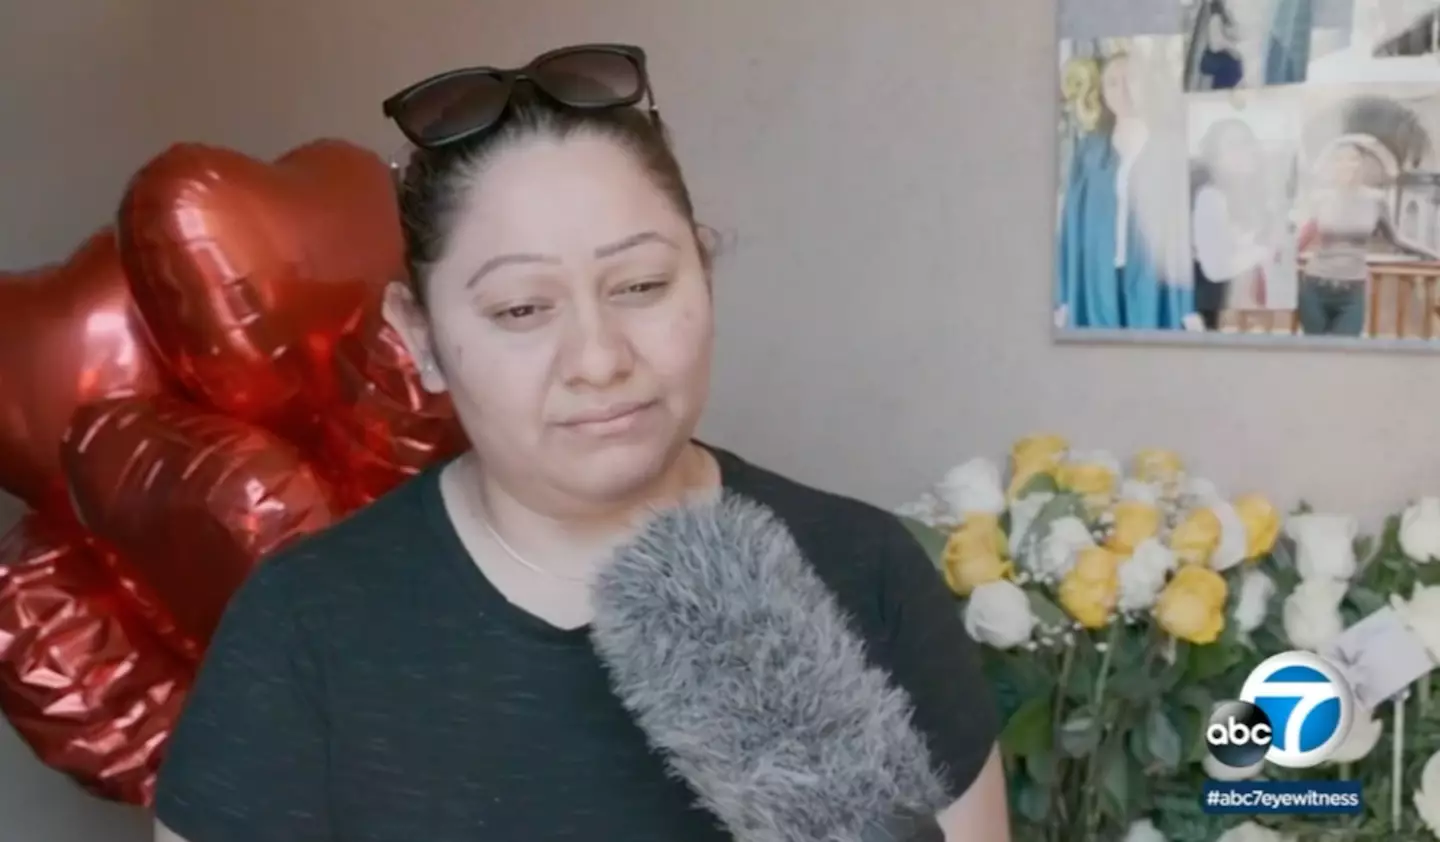 The sisters' aunt Cindy Gonzalez is devastated over the loss.